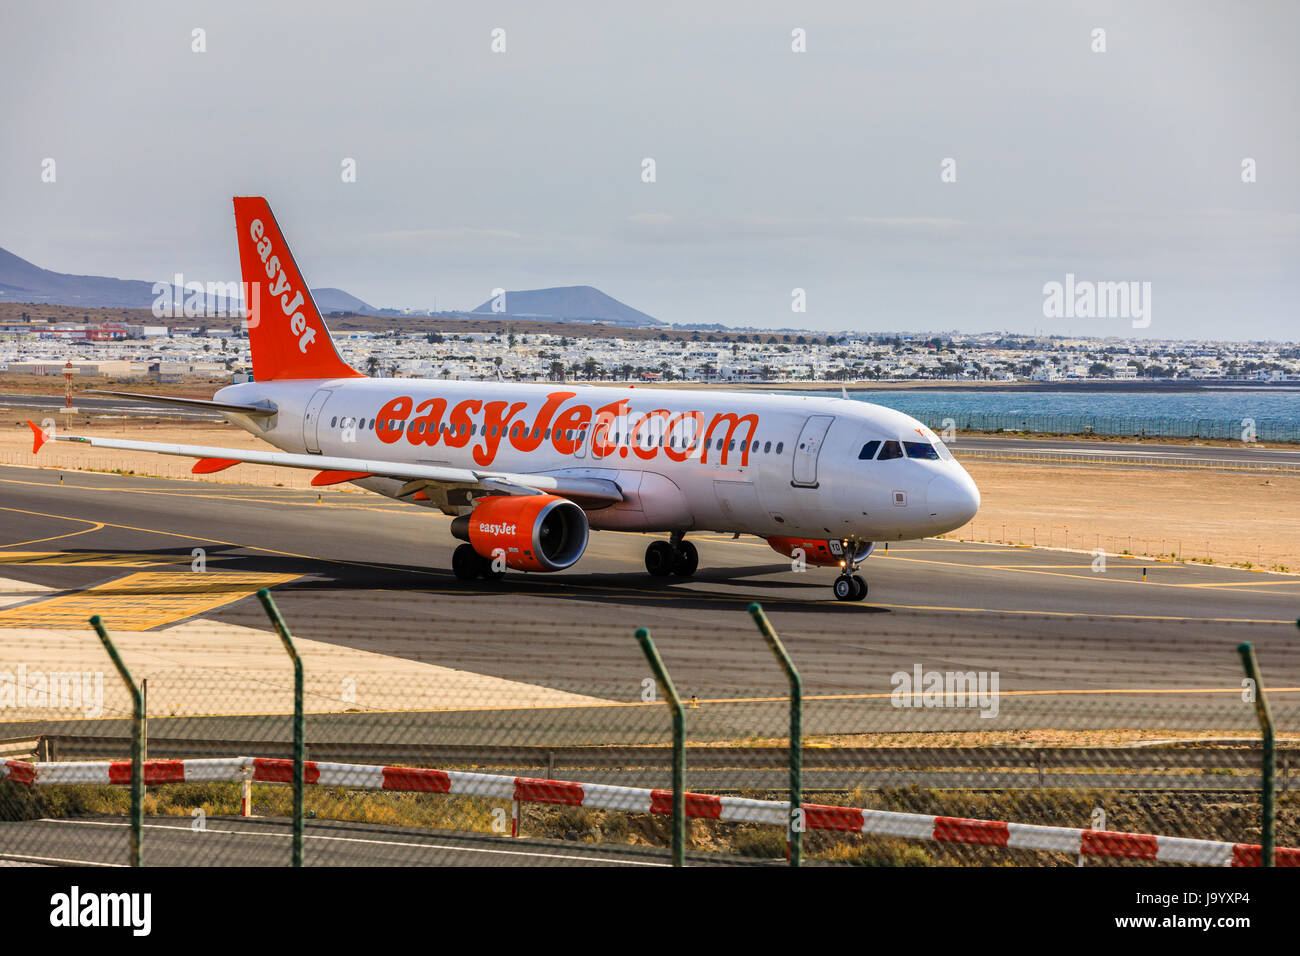 ARECIFE, SPAIN - APRIL, 15 2017: AirBus A320 of easyjet.com ready to take off at Lanzarote Airport Stock Photo